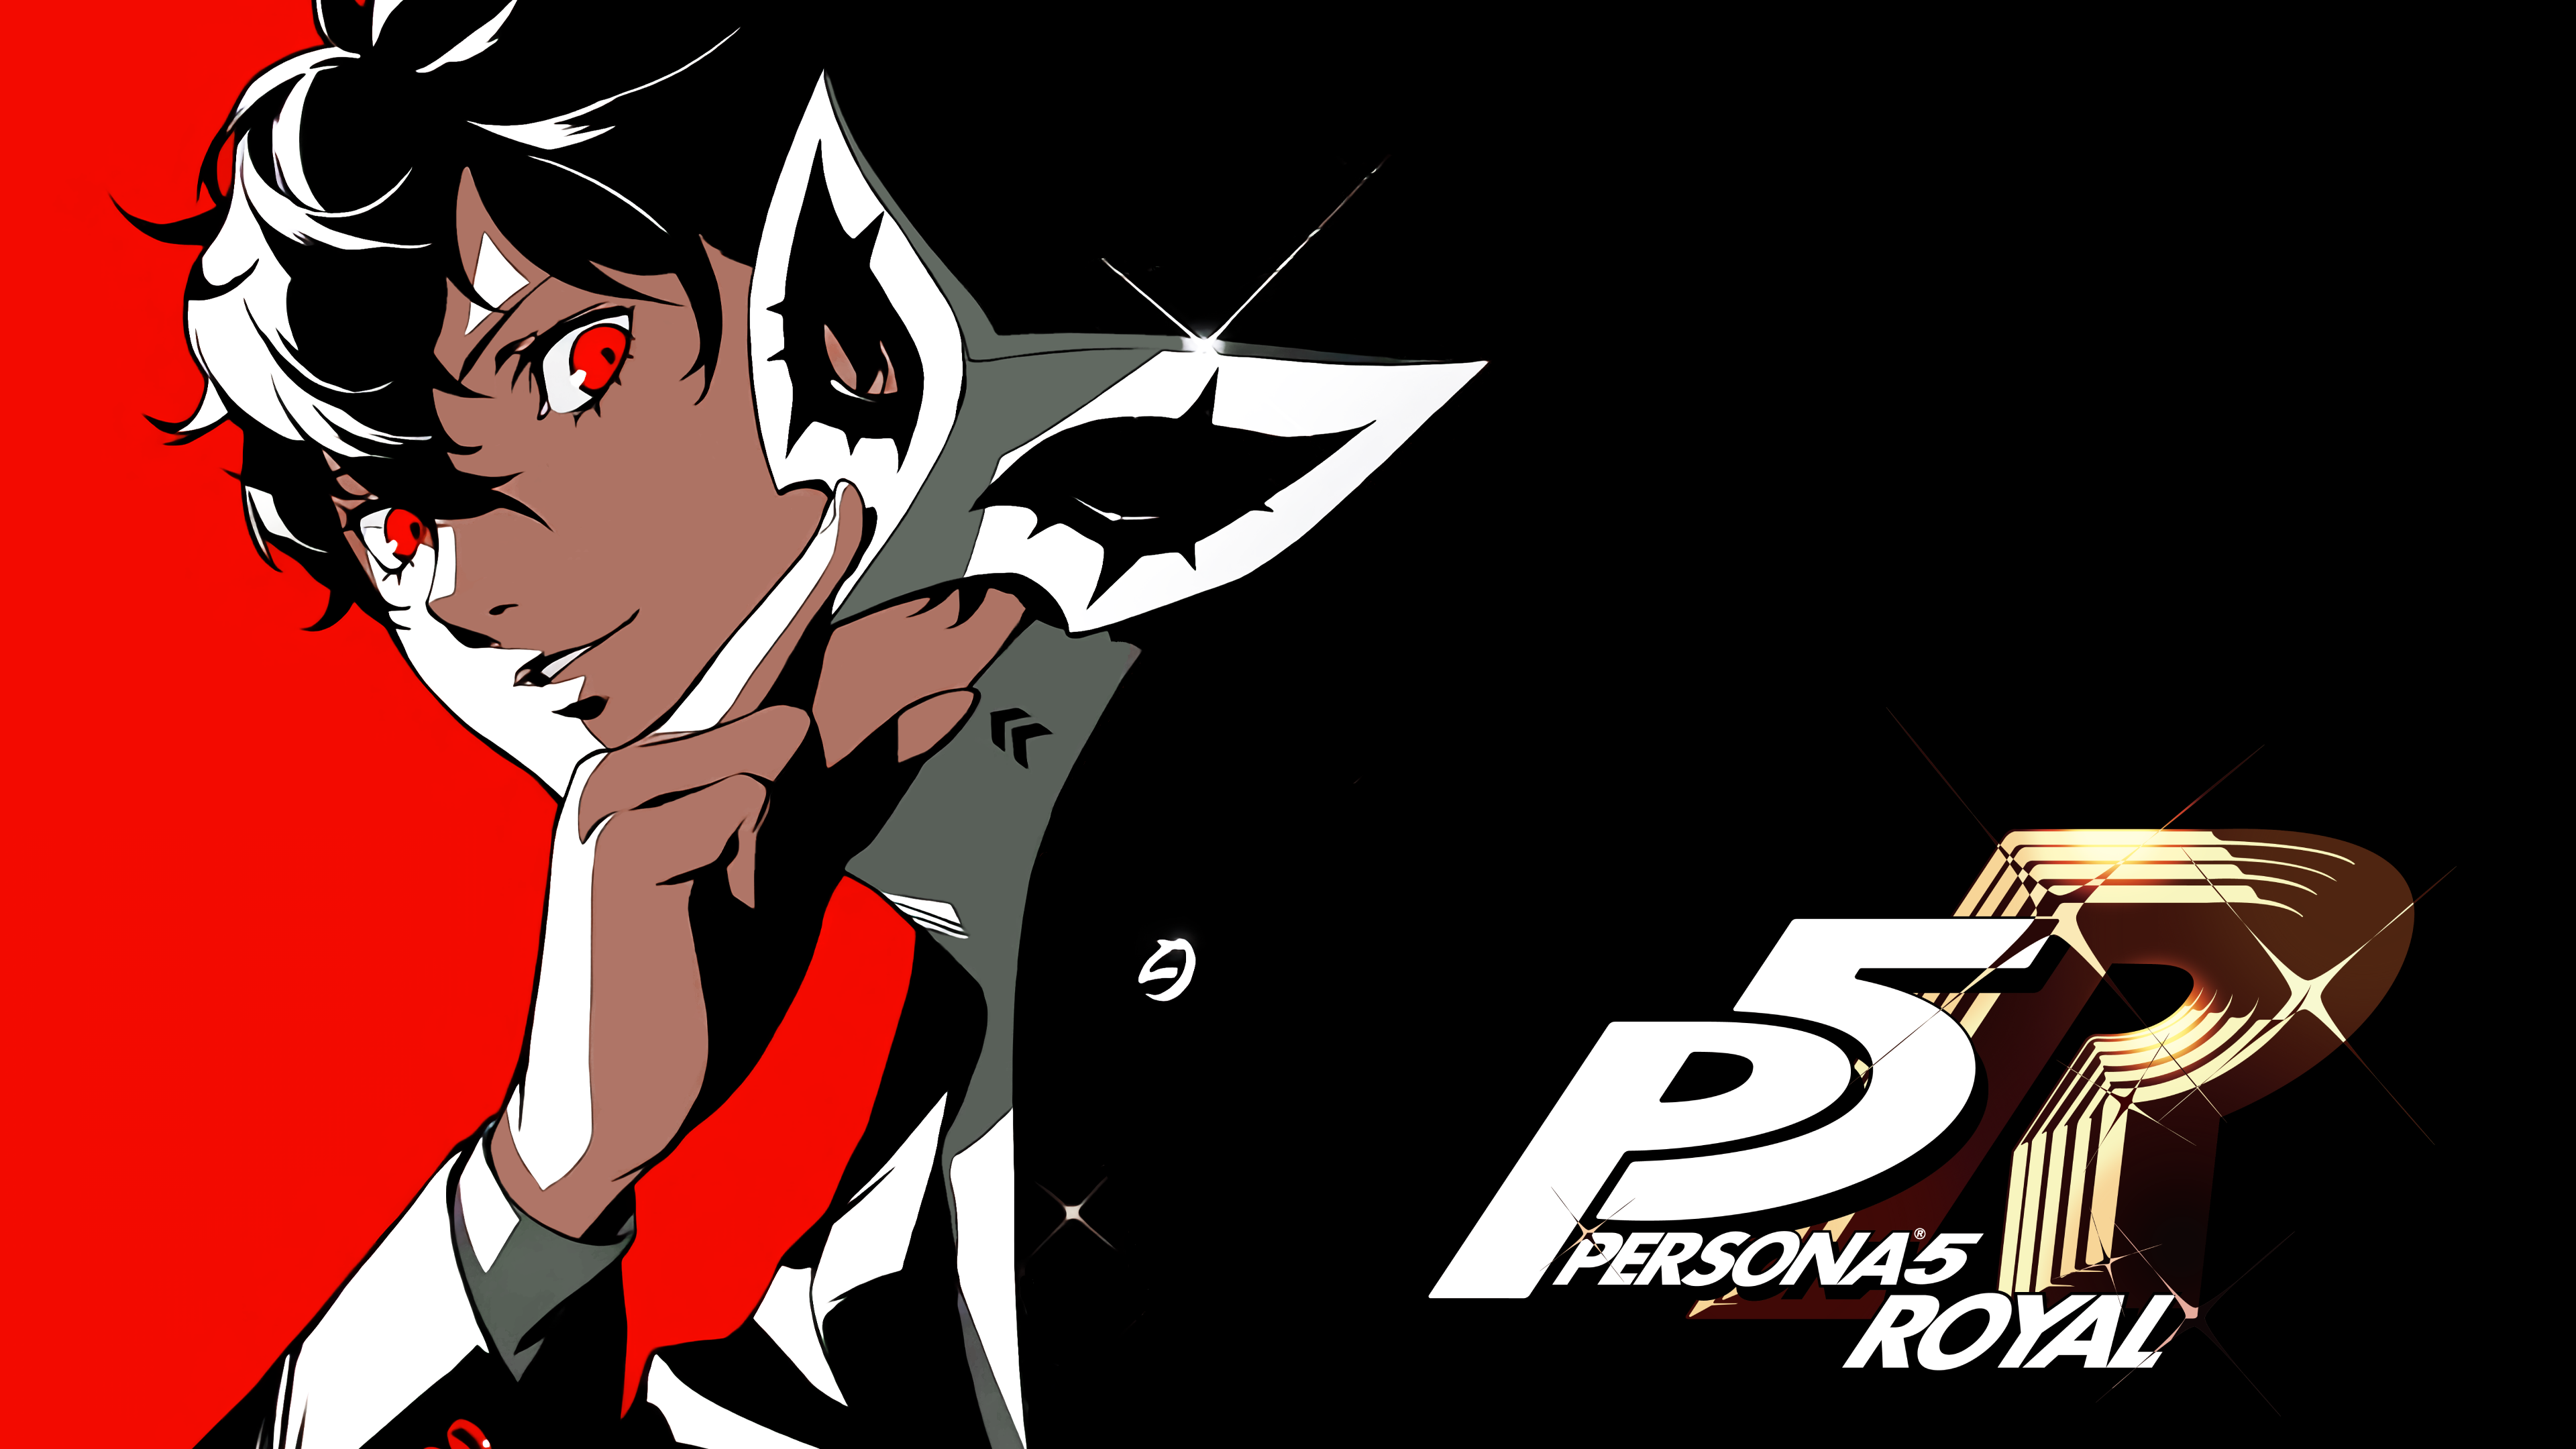 Persona 5 Images.